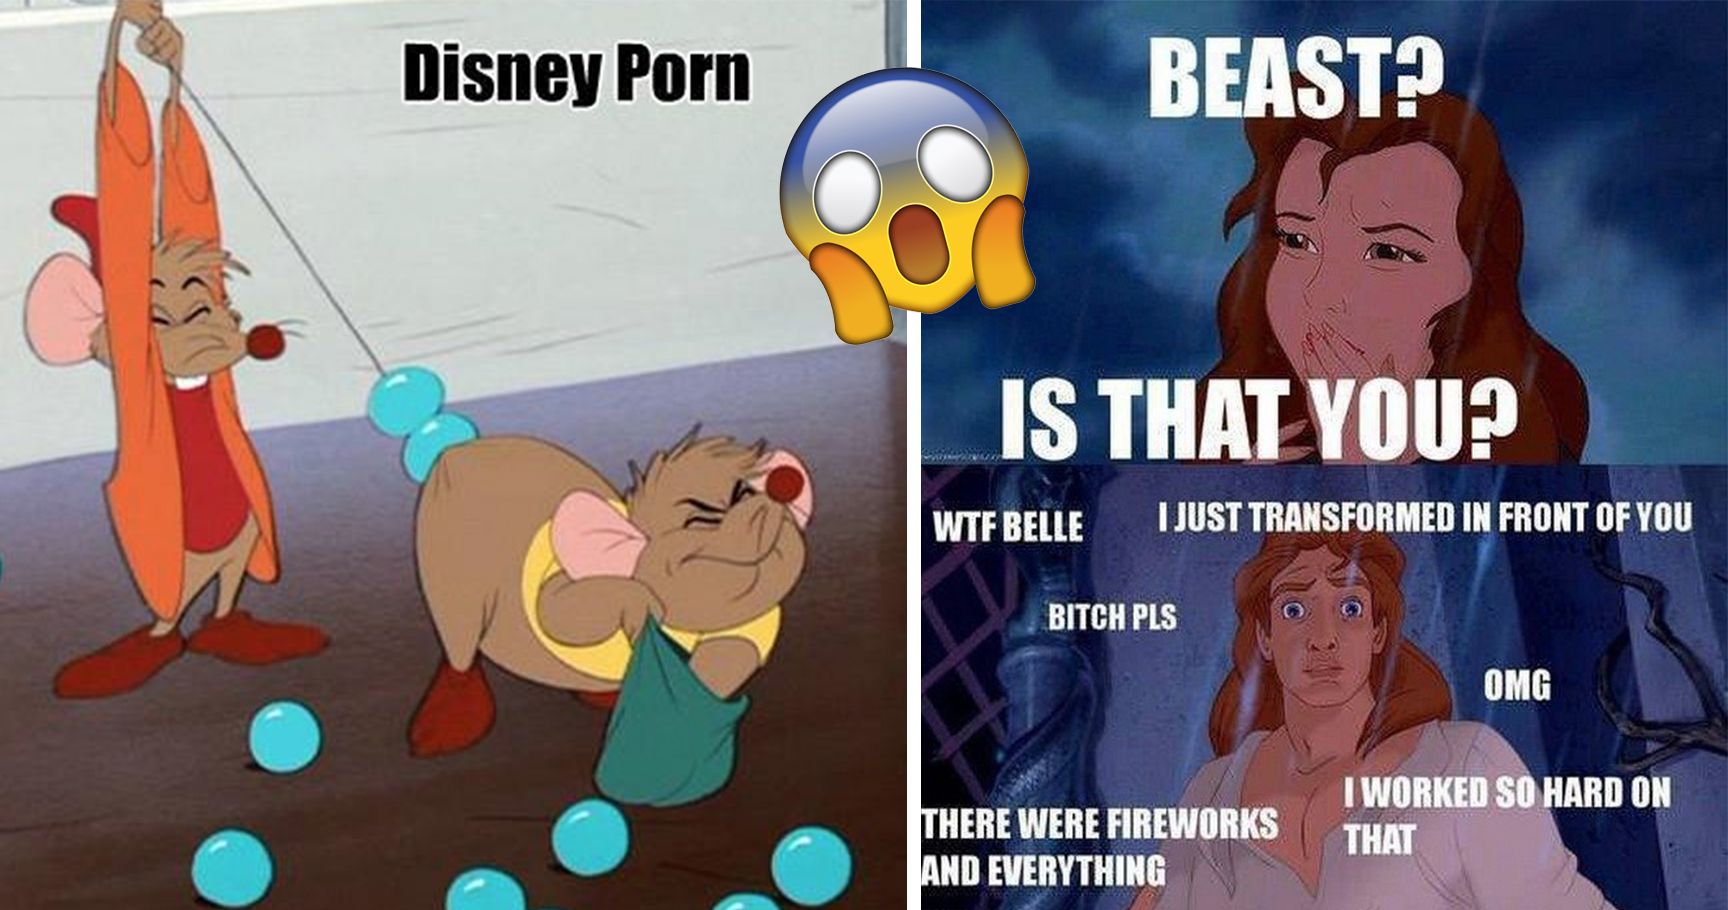 Porn Duck Meme - 15 Inappropriate Disney Memes That Will Totally Ruin Your ...